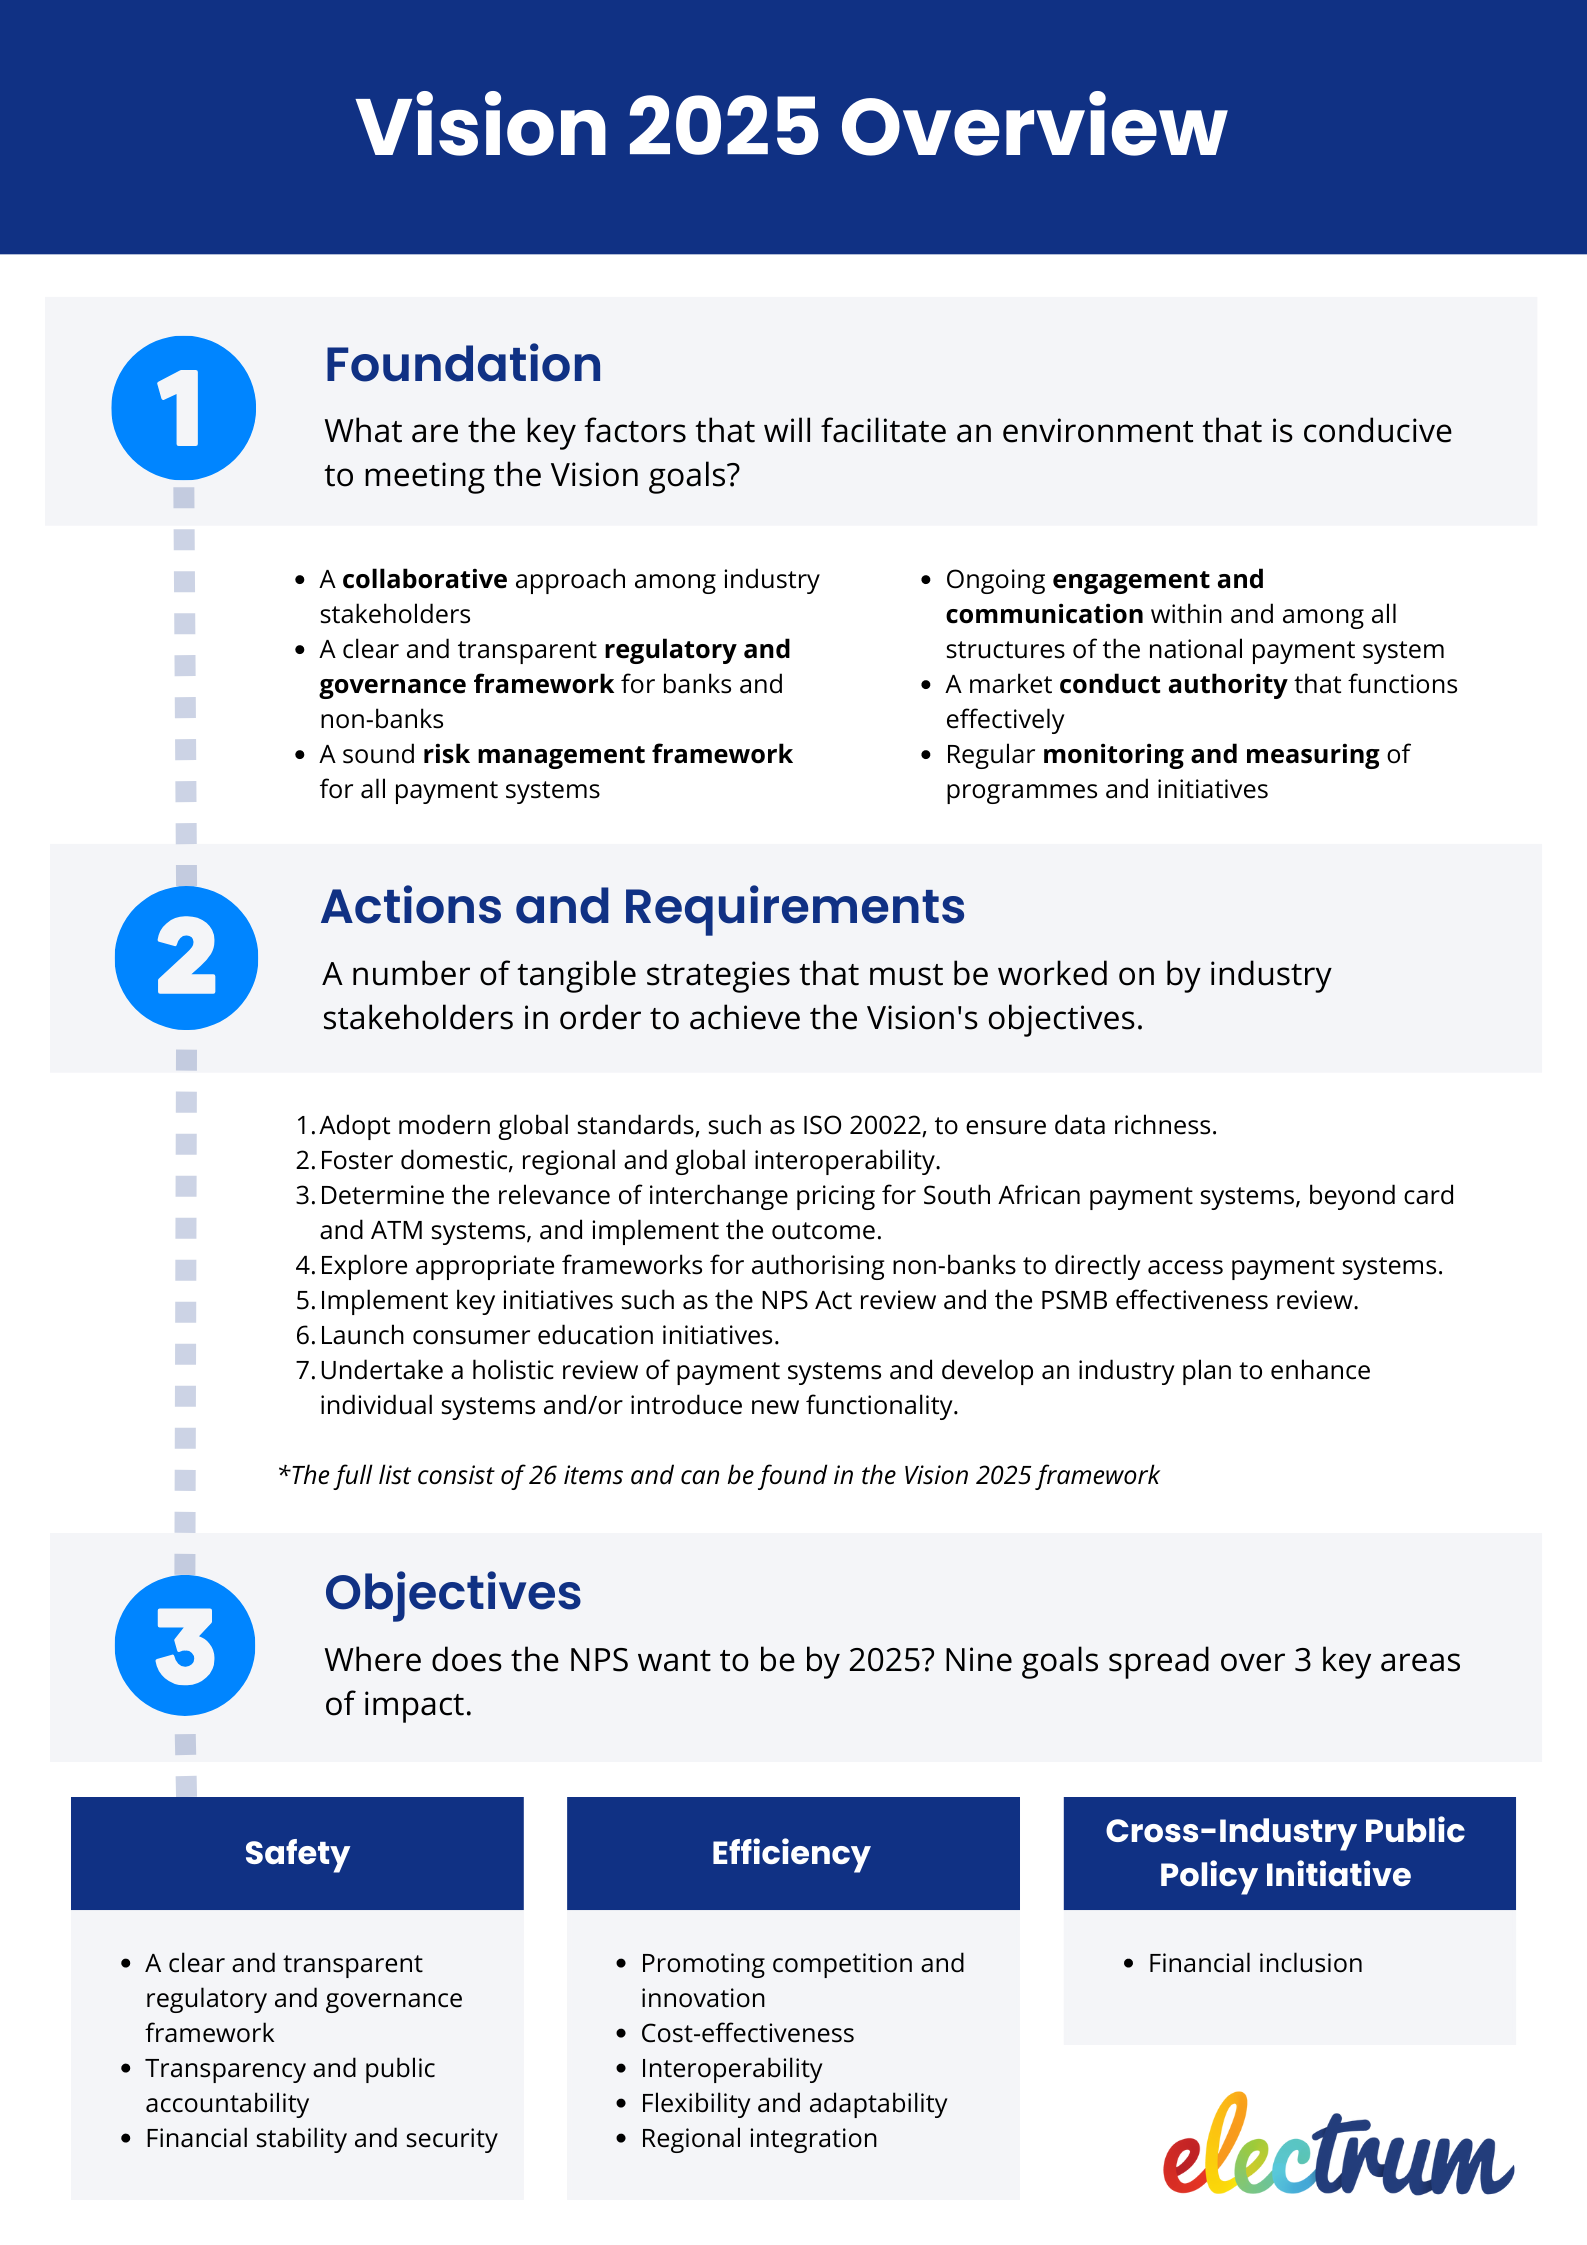 A summary of the foundation, actions, requirements, and objectives of SARB's Vision 2025 plan